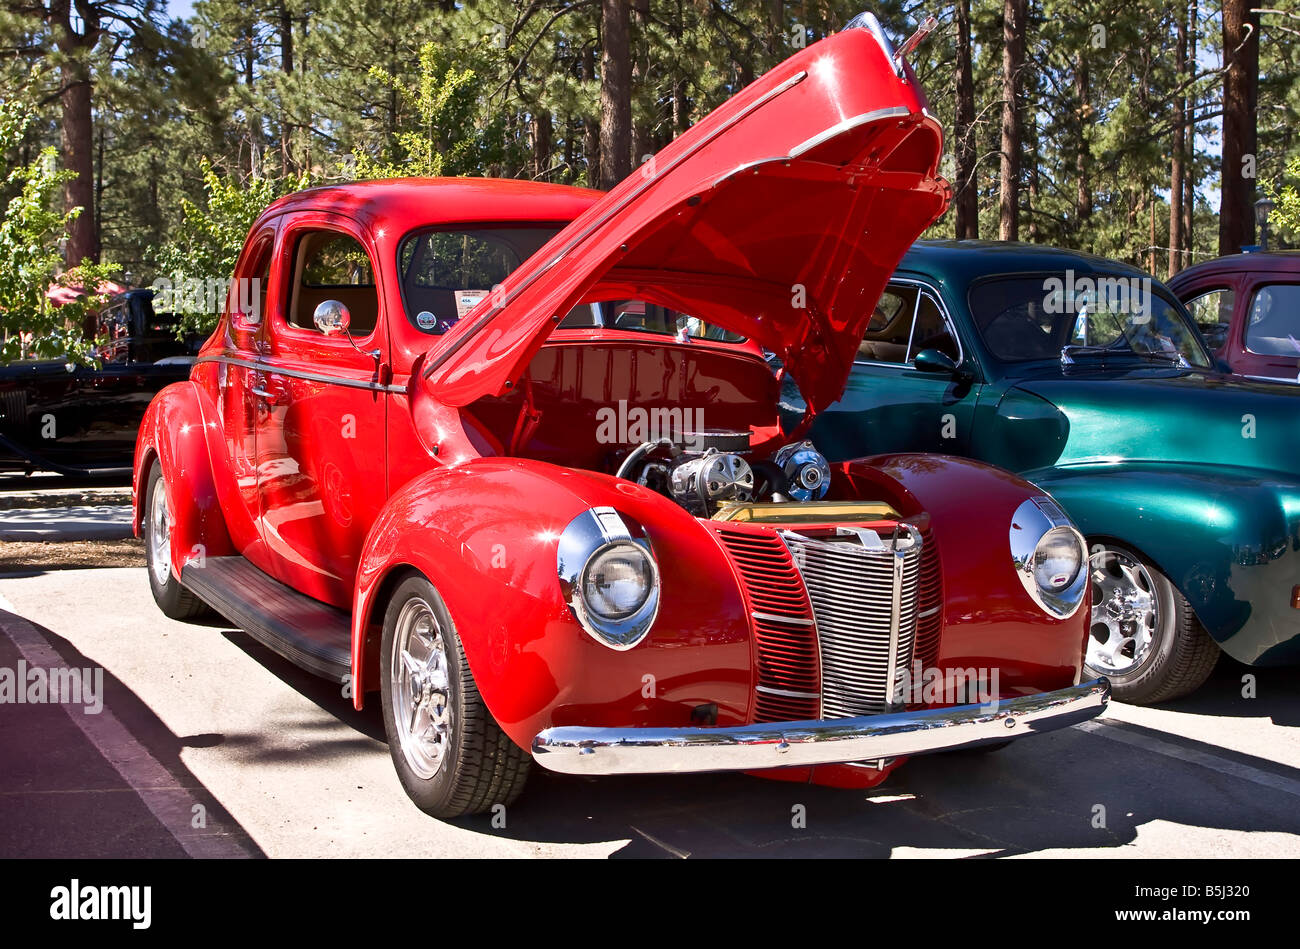 Red Ford V8 Super Deluxe Supercharged Coupe Stock Photo